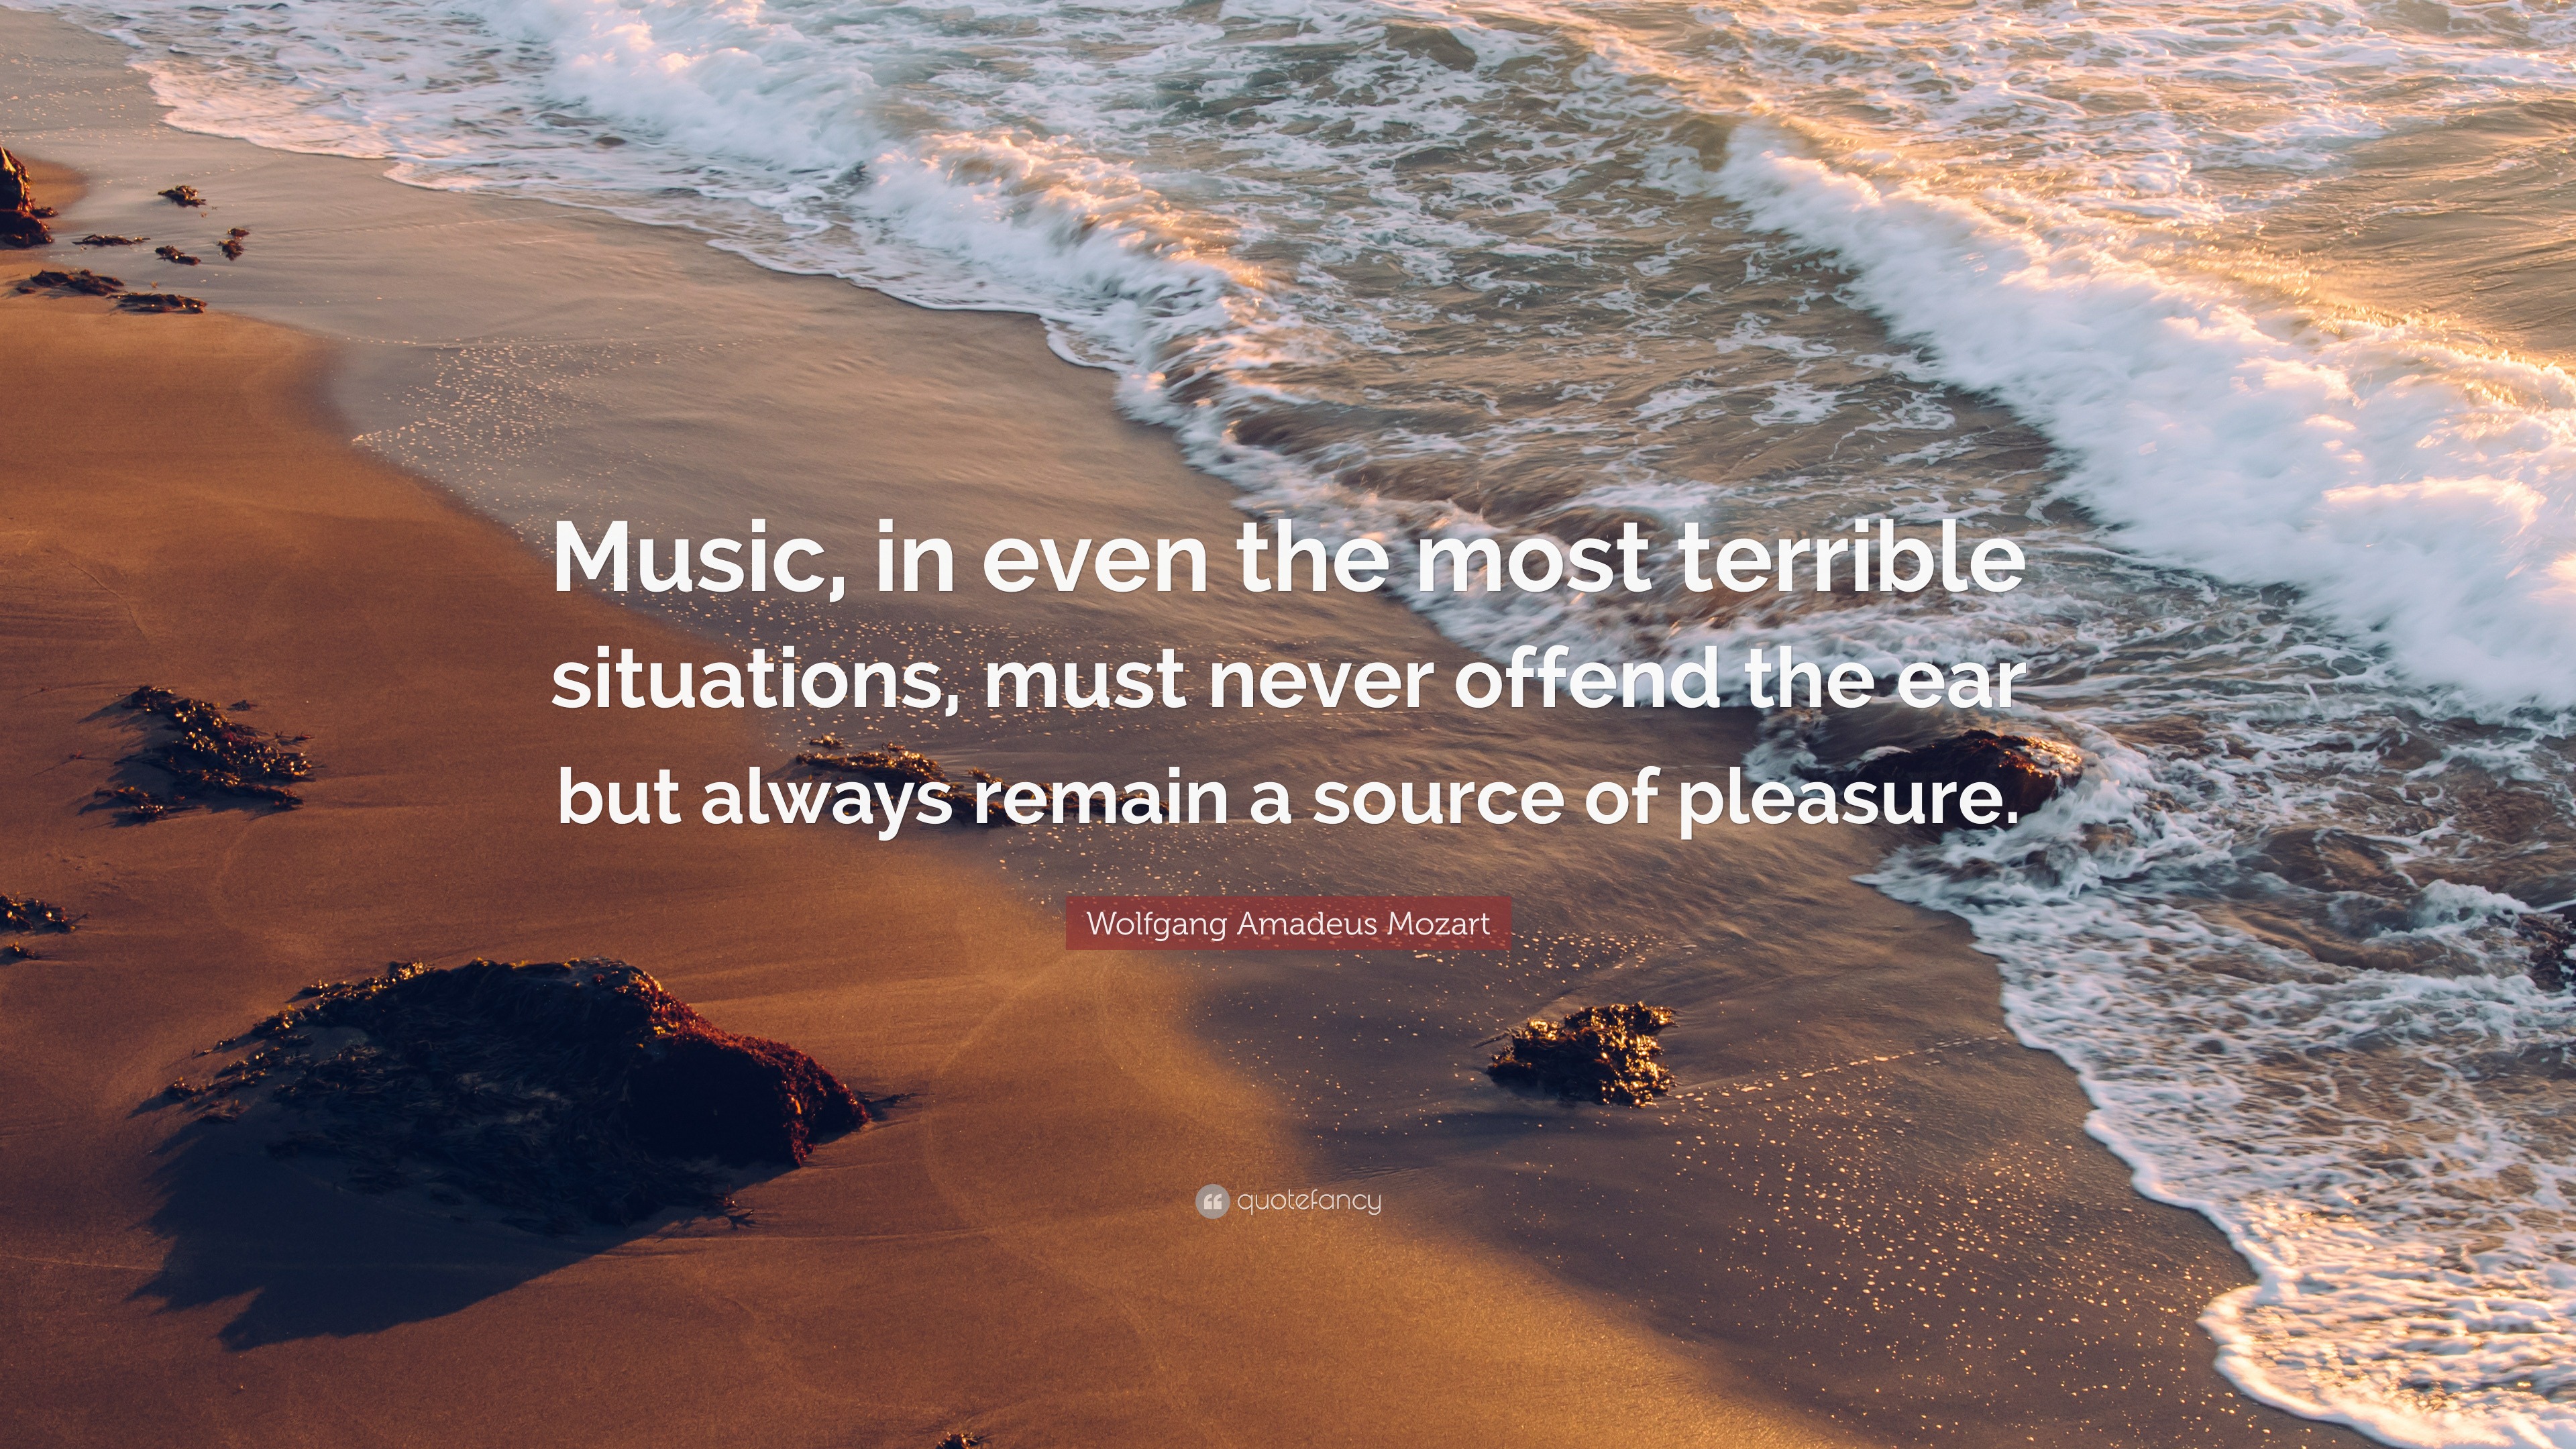 Wolfgang Amadeus Mozart Quote: “Music, in even the most terrible ...